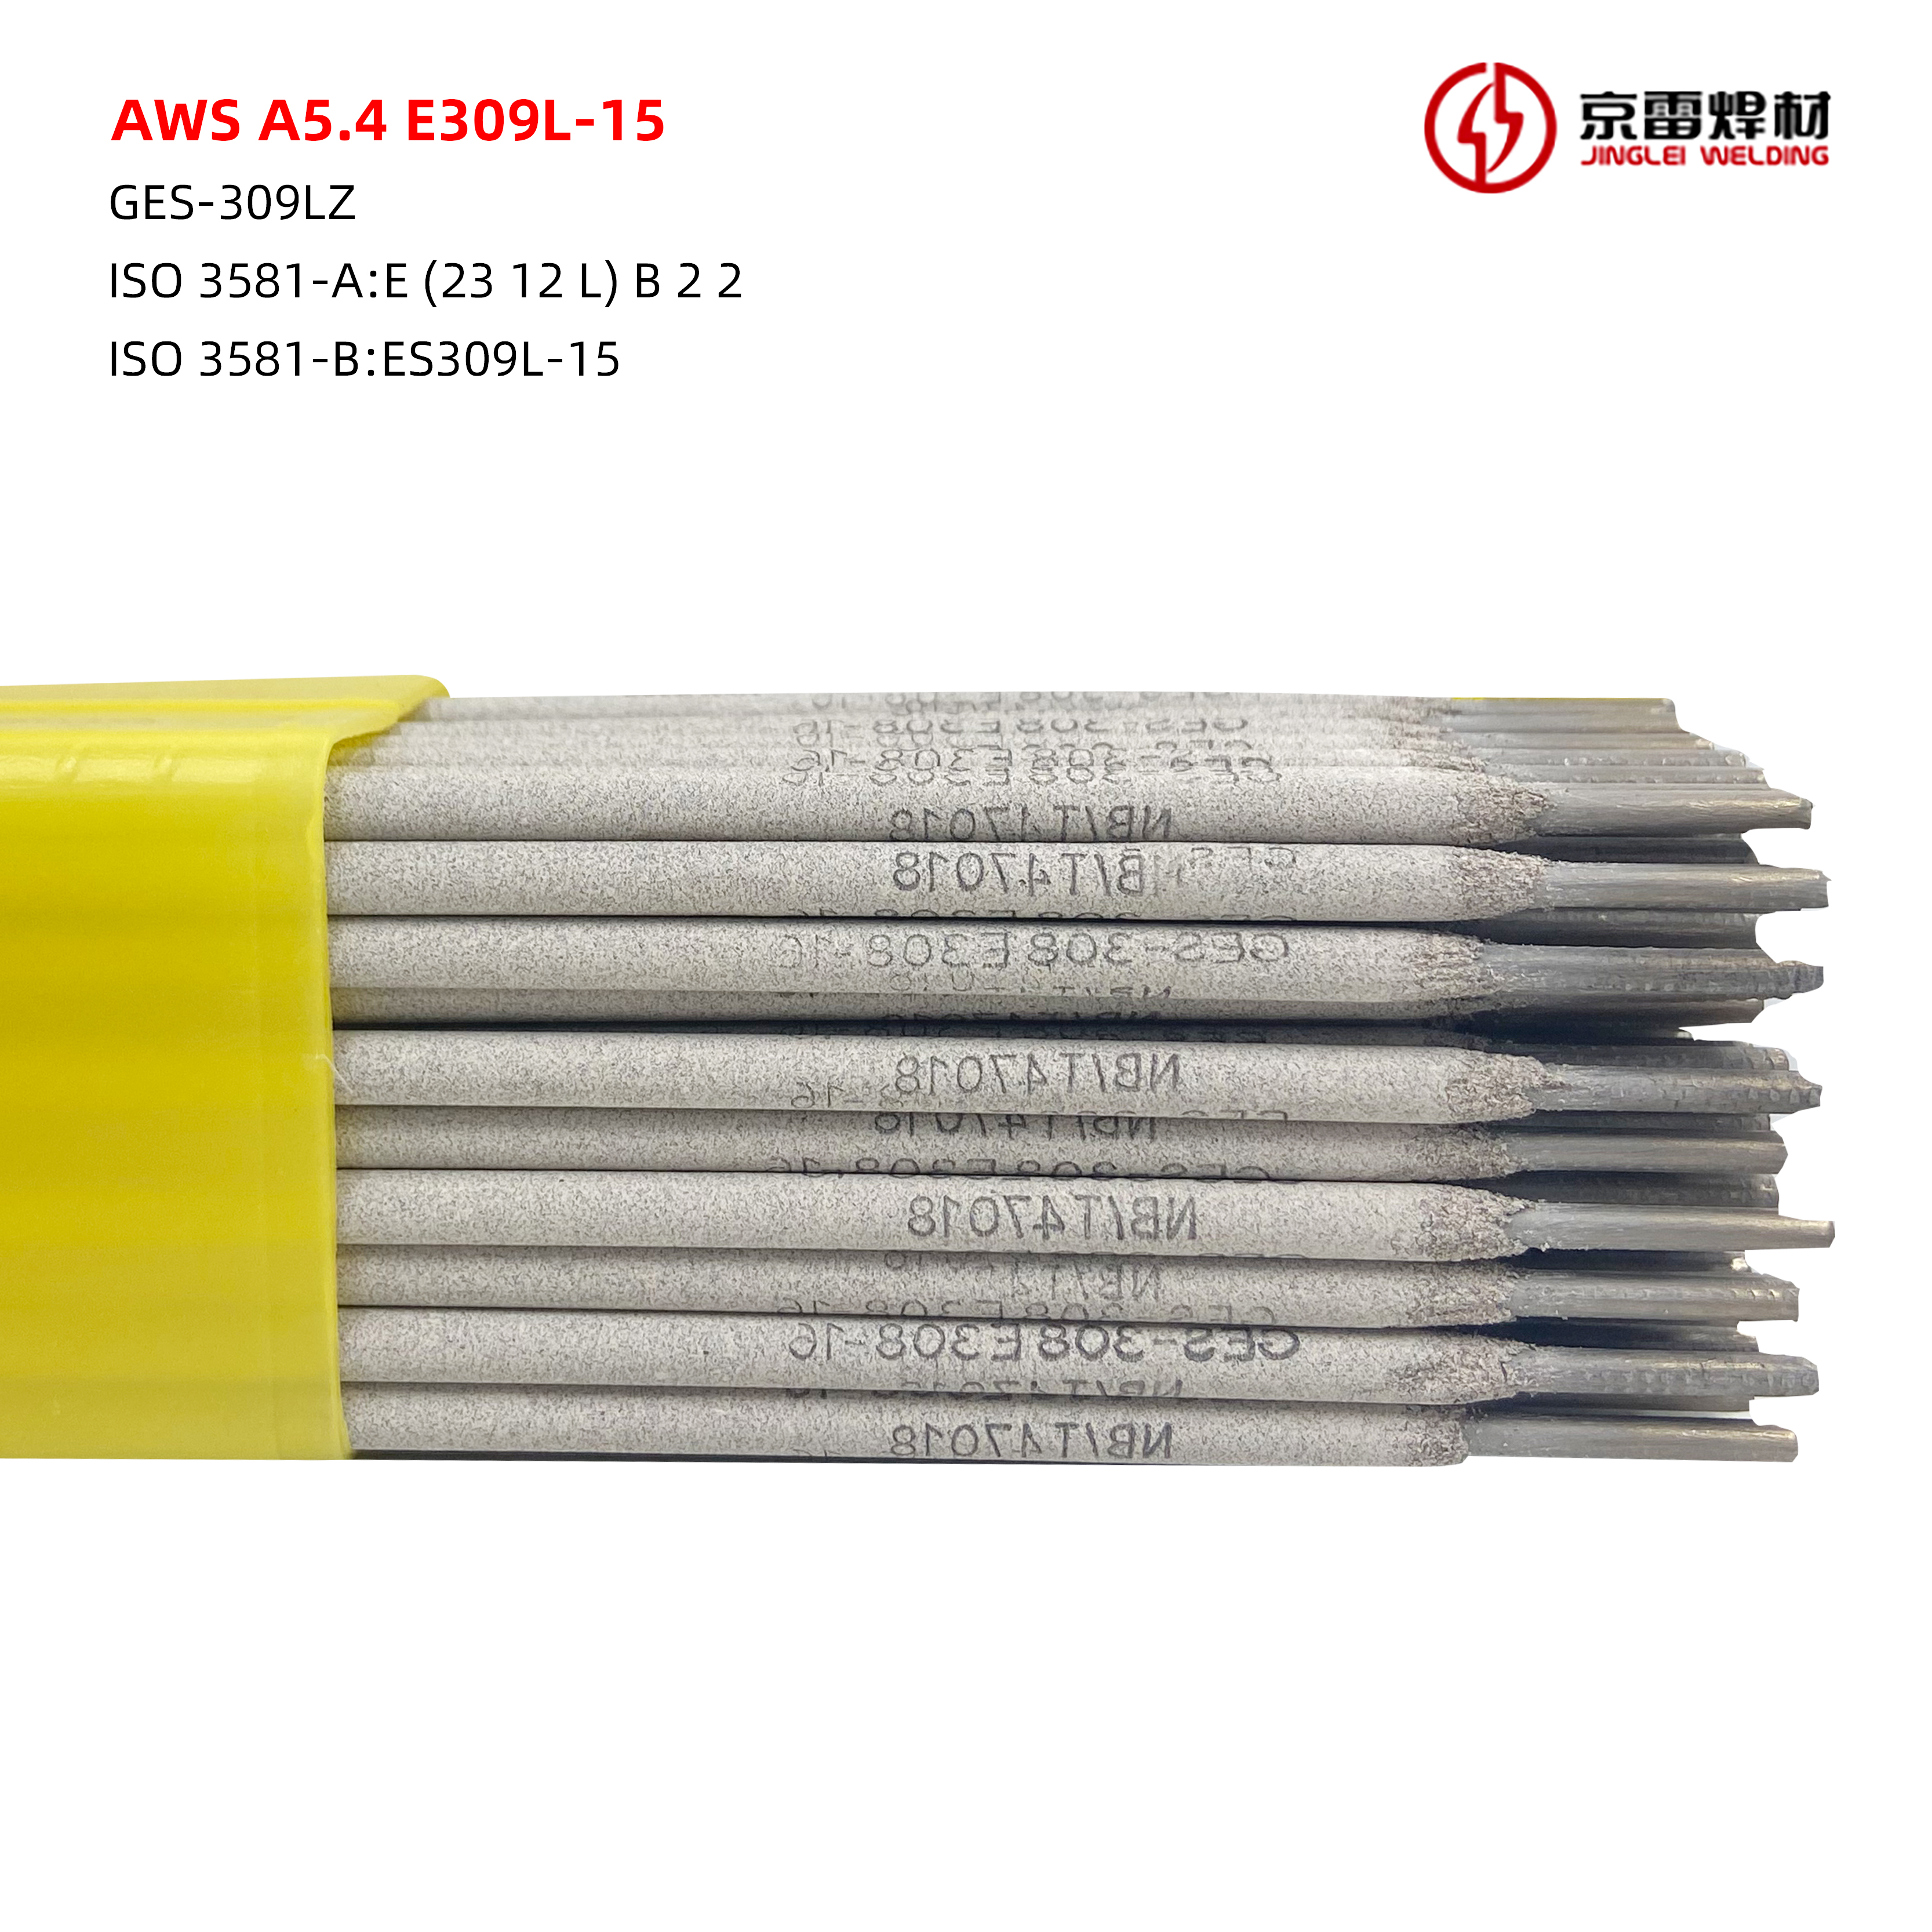 Stainless Steels Manual Electrode E309L-15 Carbon steel and stainless steel tower welding